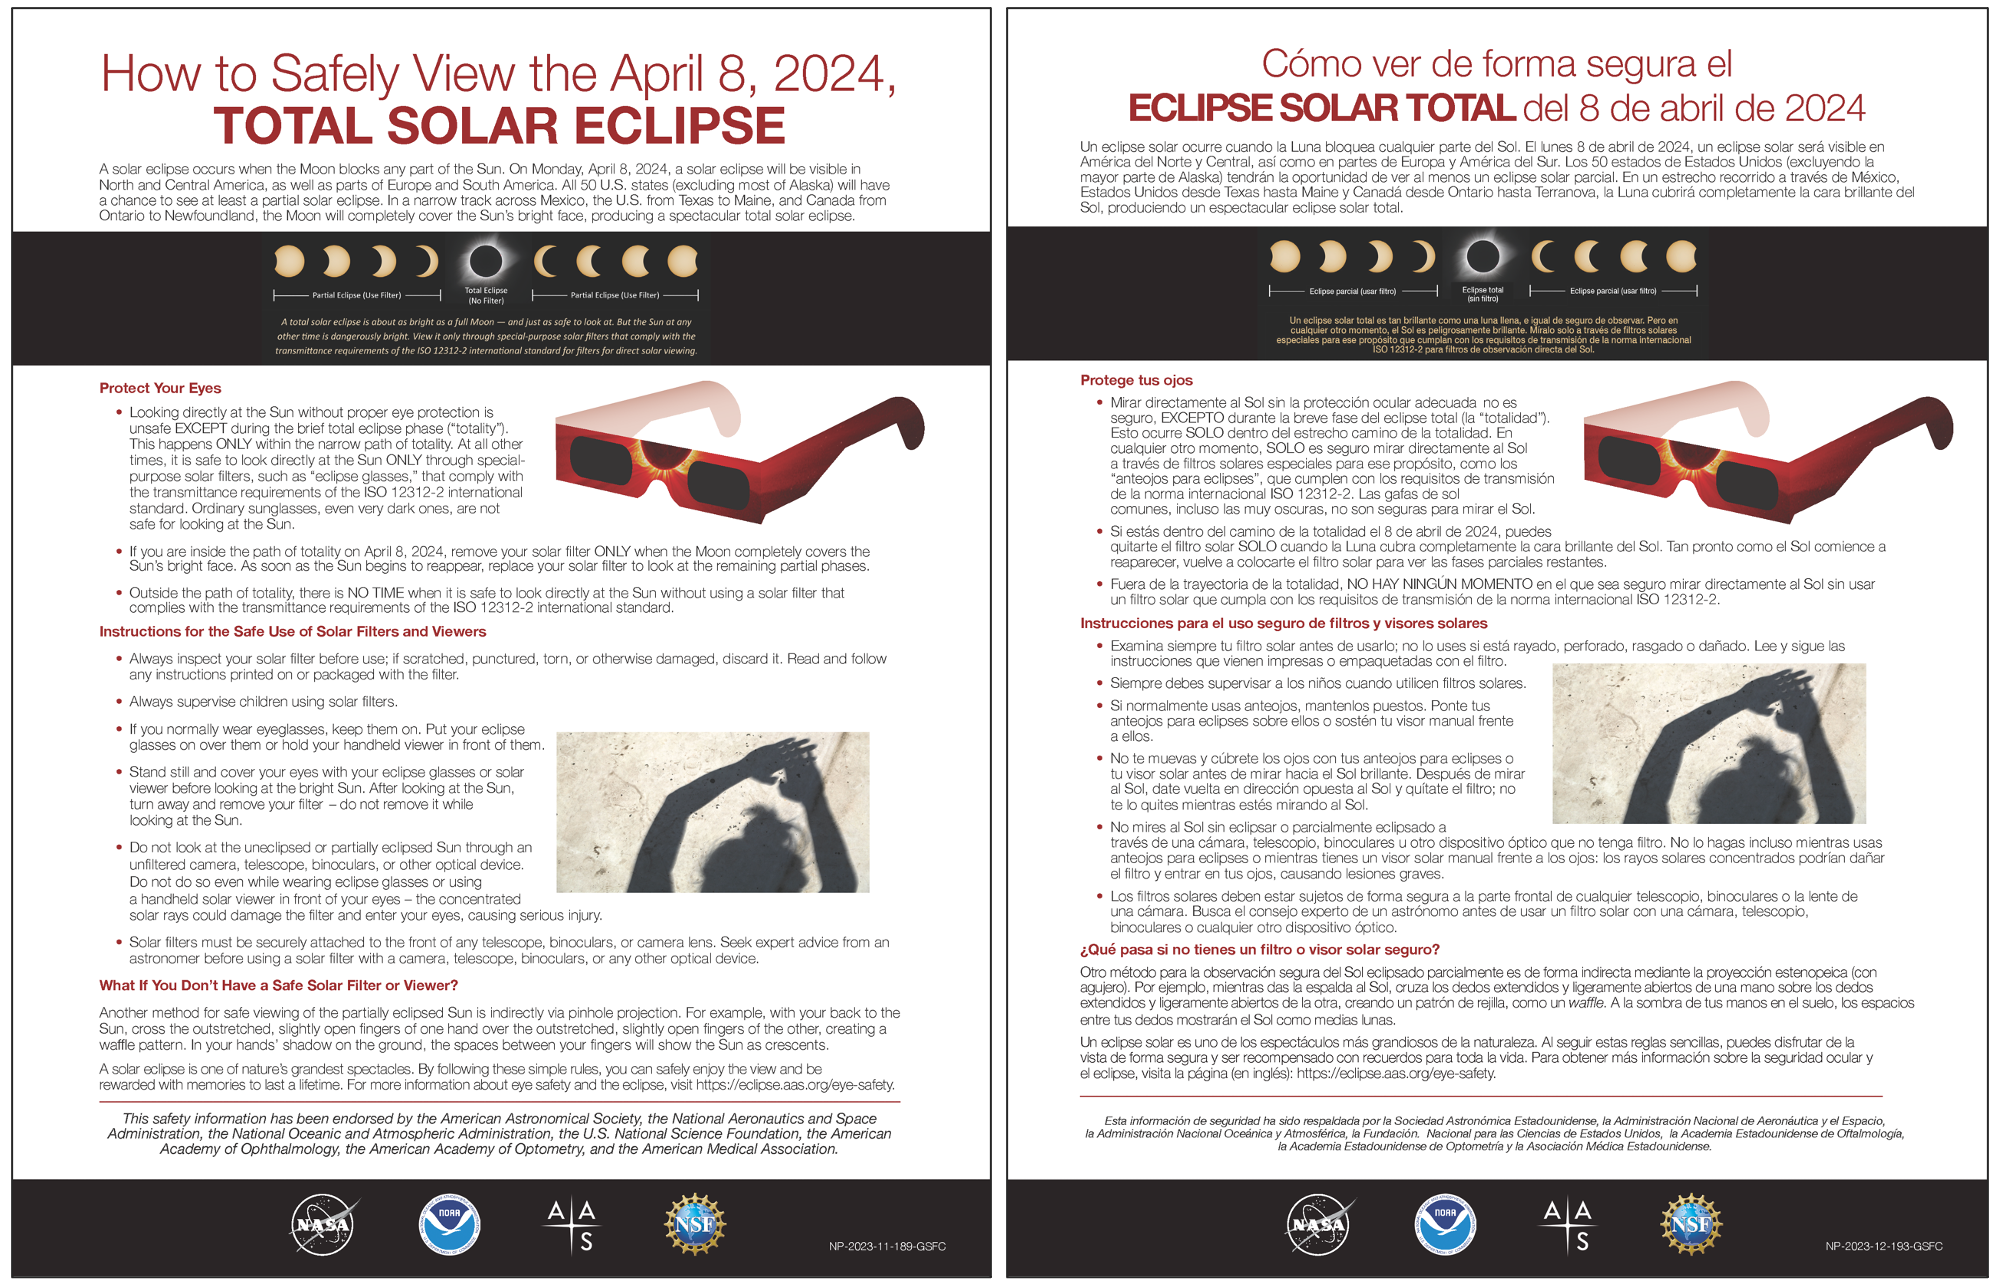 On the left, is an image of the eclipse safety sheet in English. On the right, is an image of the eclipse safety sheet in Spanish.